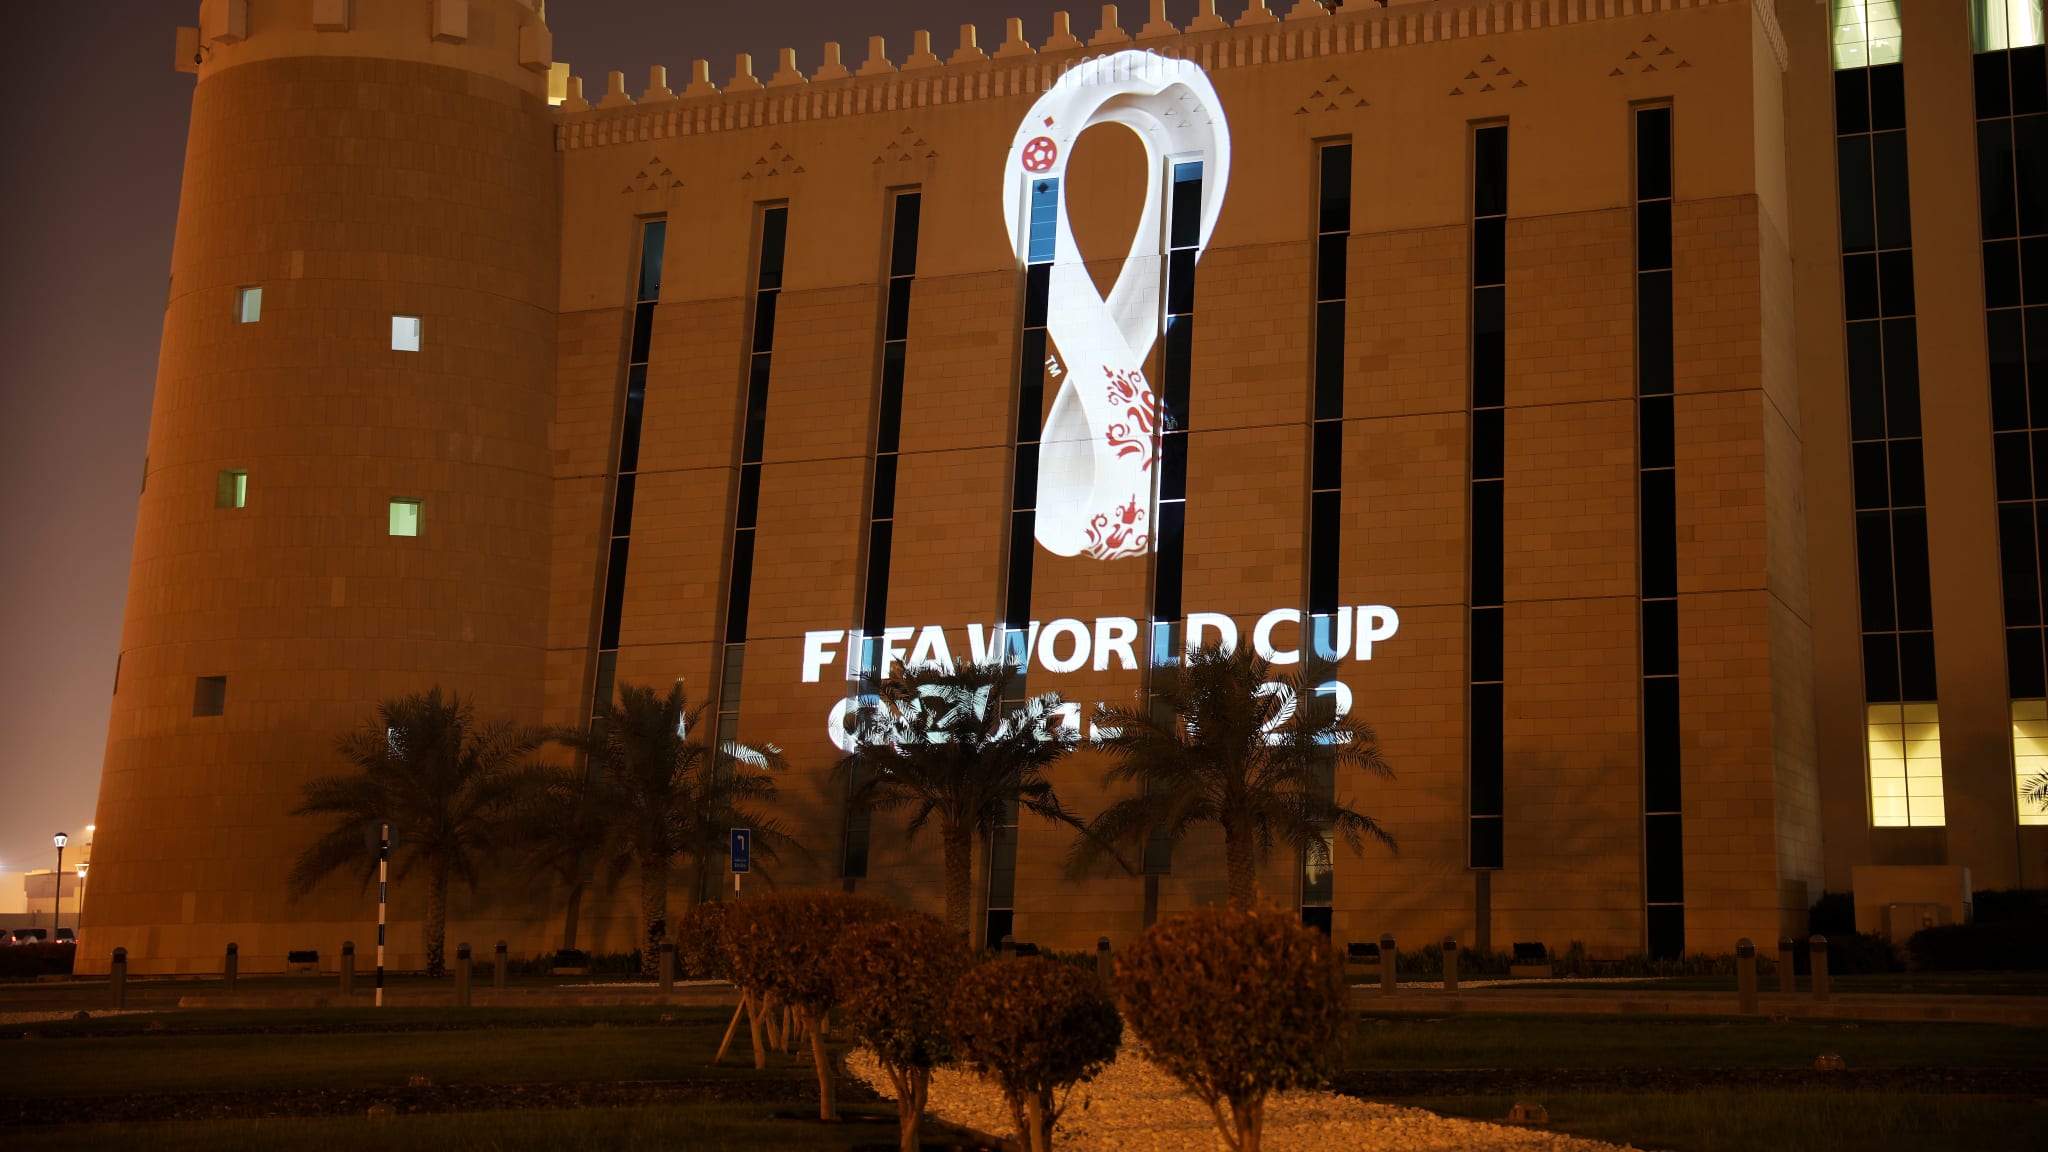 world cup 2022, vòng loại world cup, world cup, vòng loại world cup 2022, qatar, logo world cup, qatar world cup